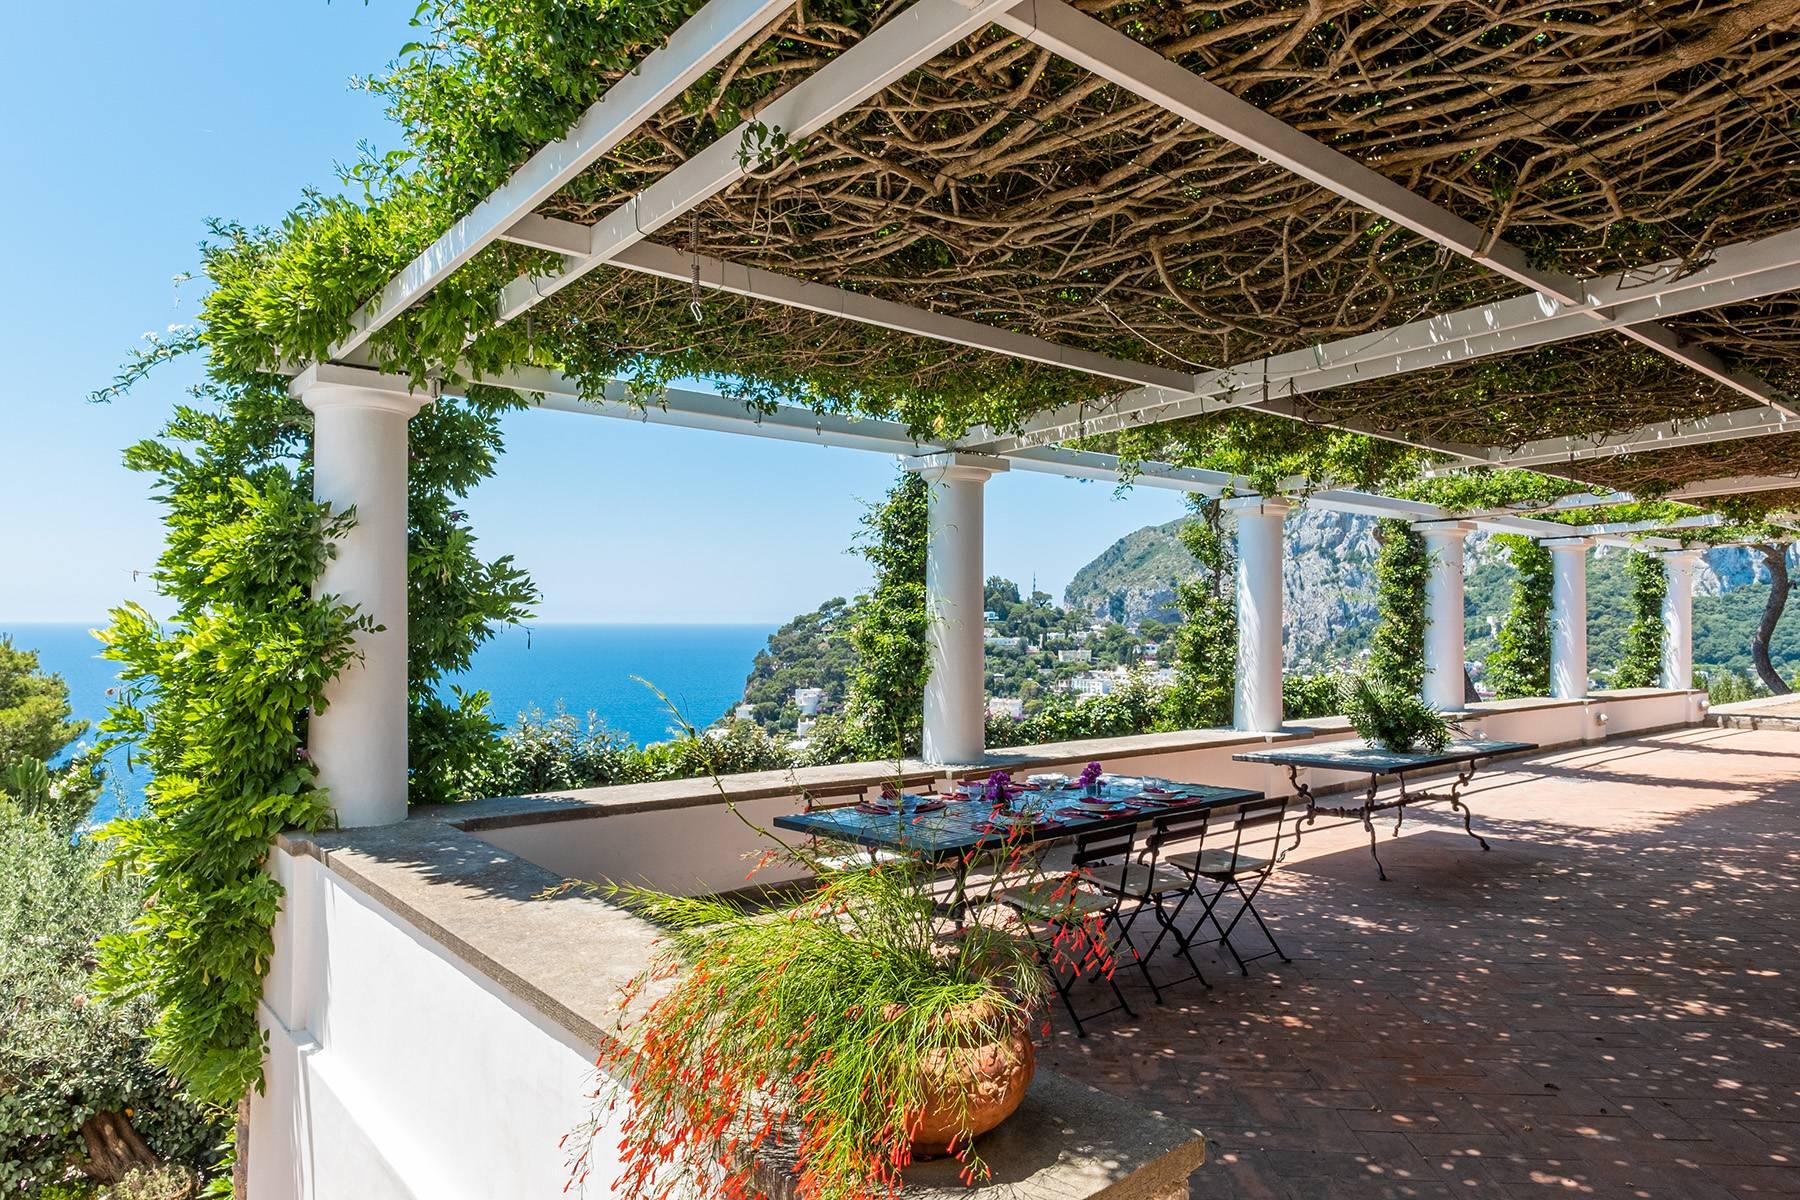 Stunning villa with swimming pool overlooking Capri and the sea - 1